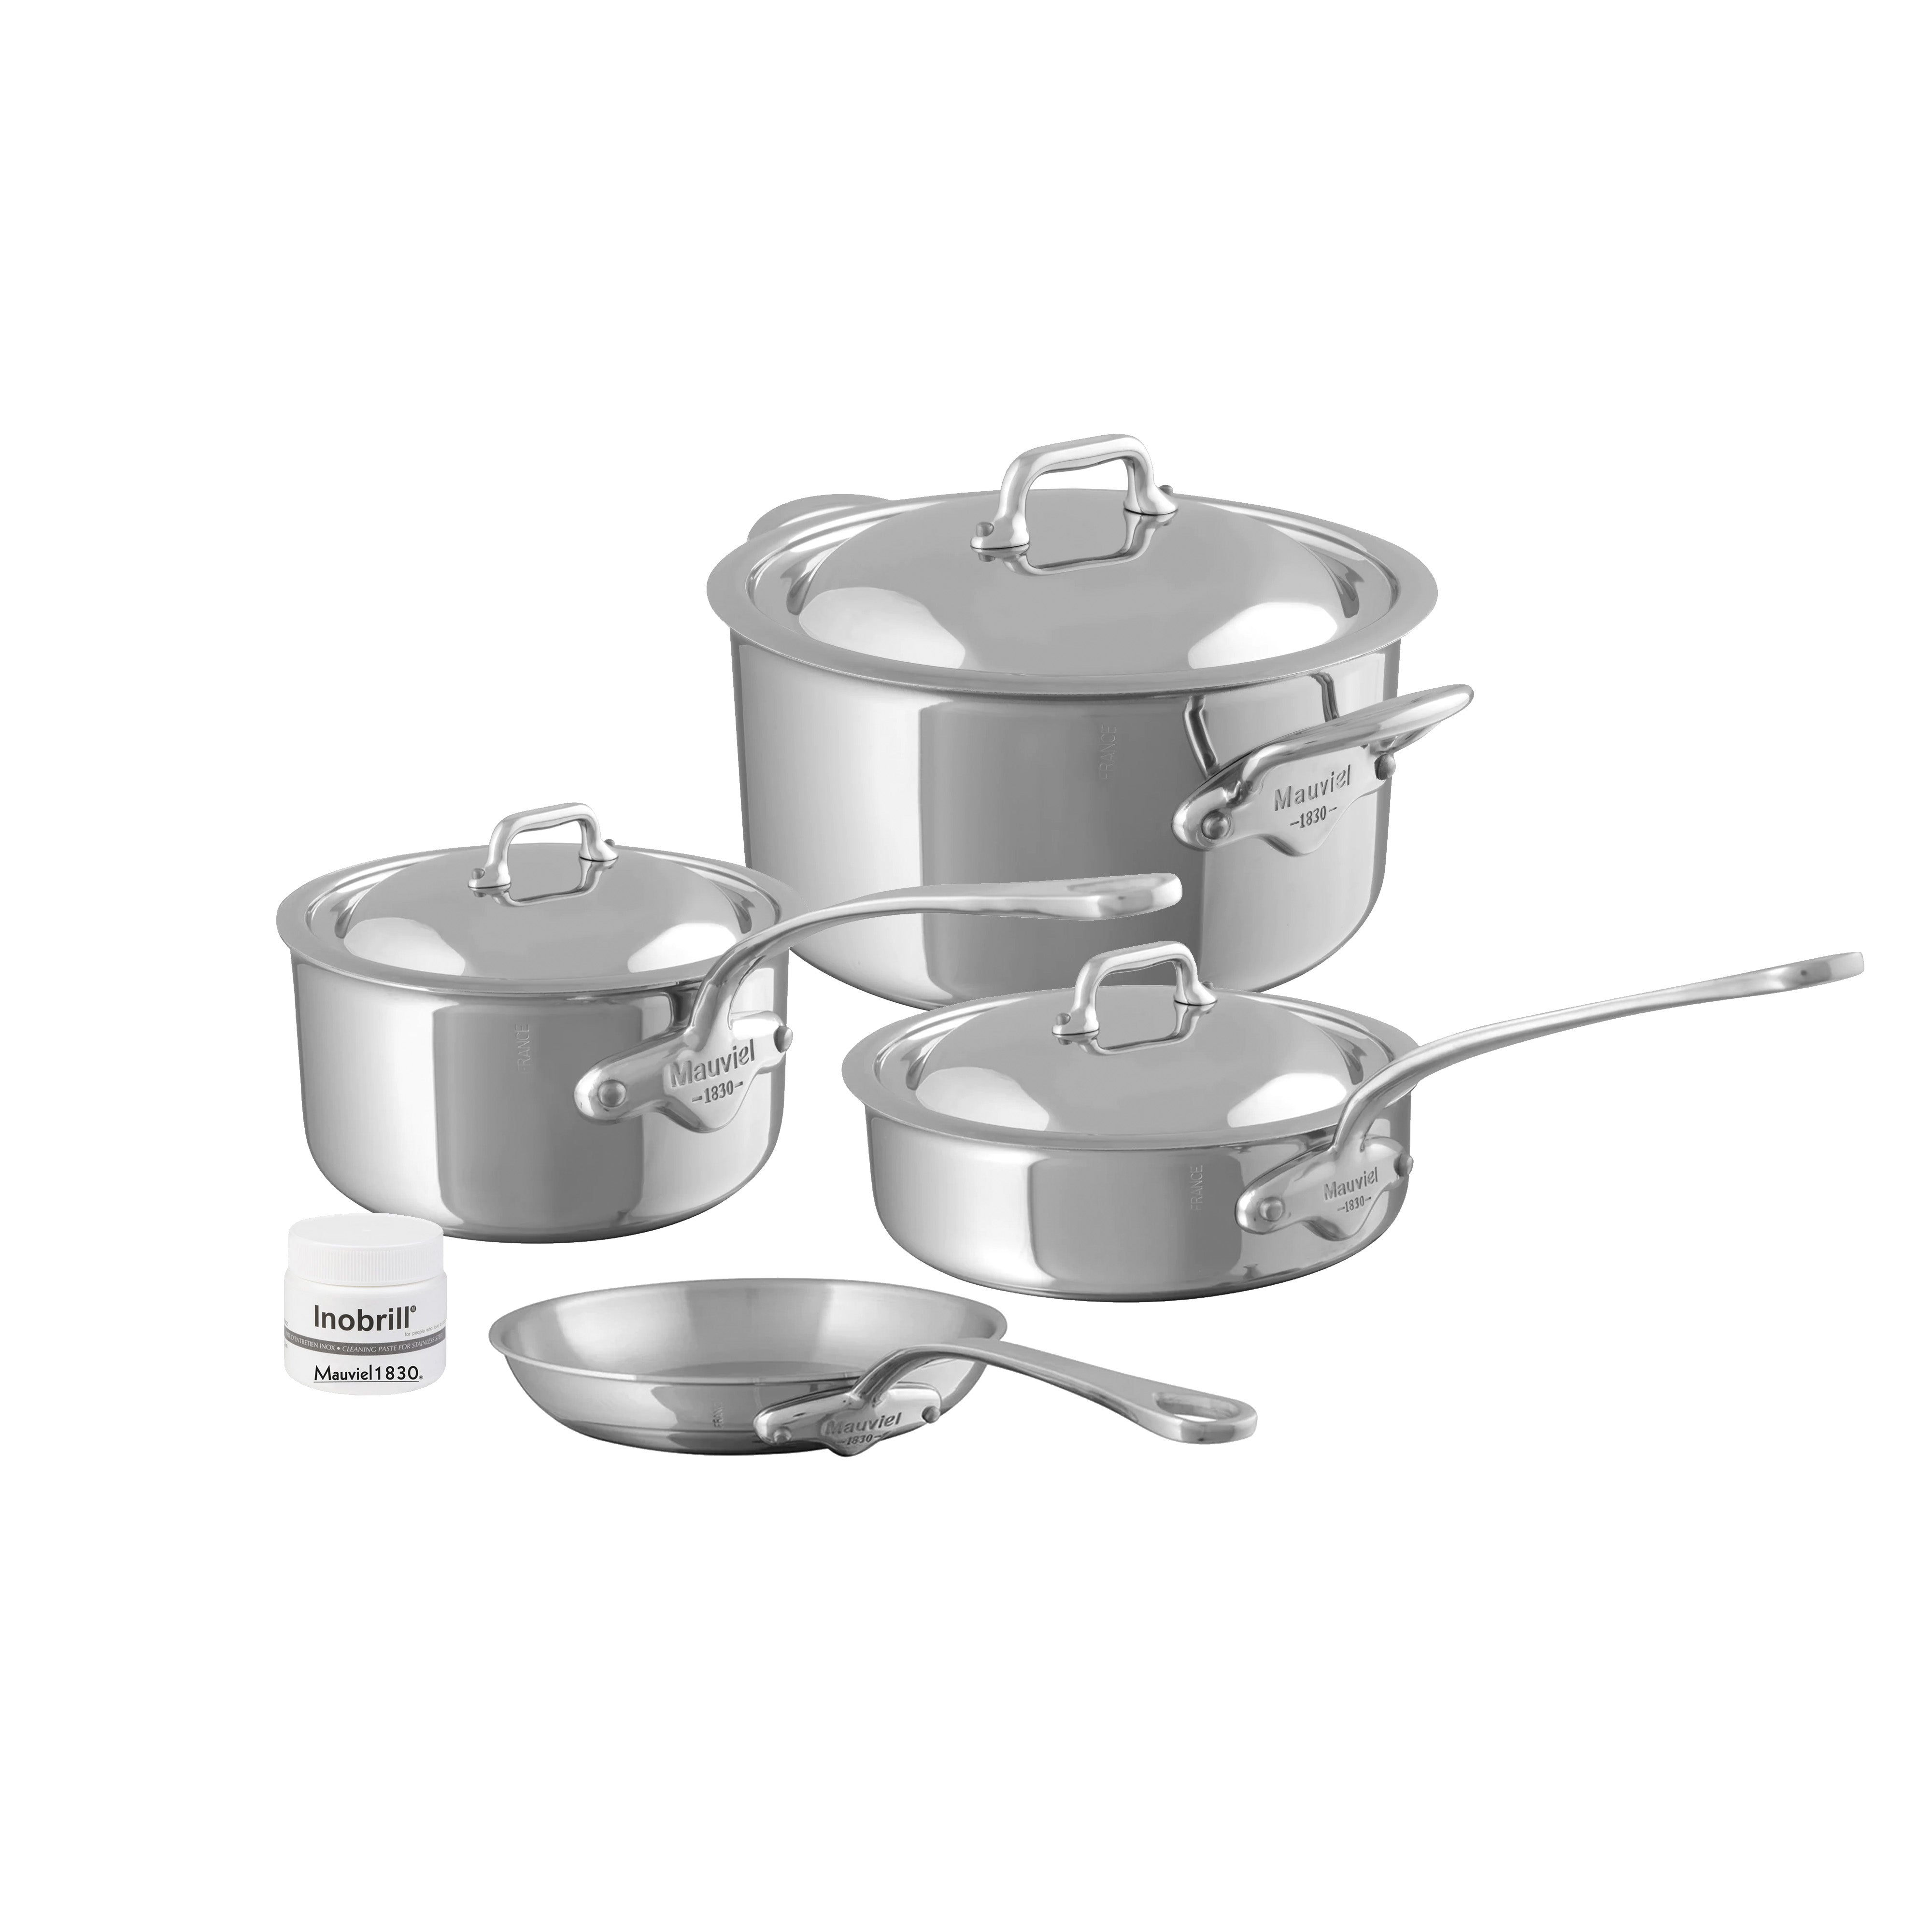 Mauviel M'Cook Stainless Steel Rondeau With Glass Lid, 3.2-Quart